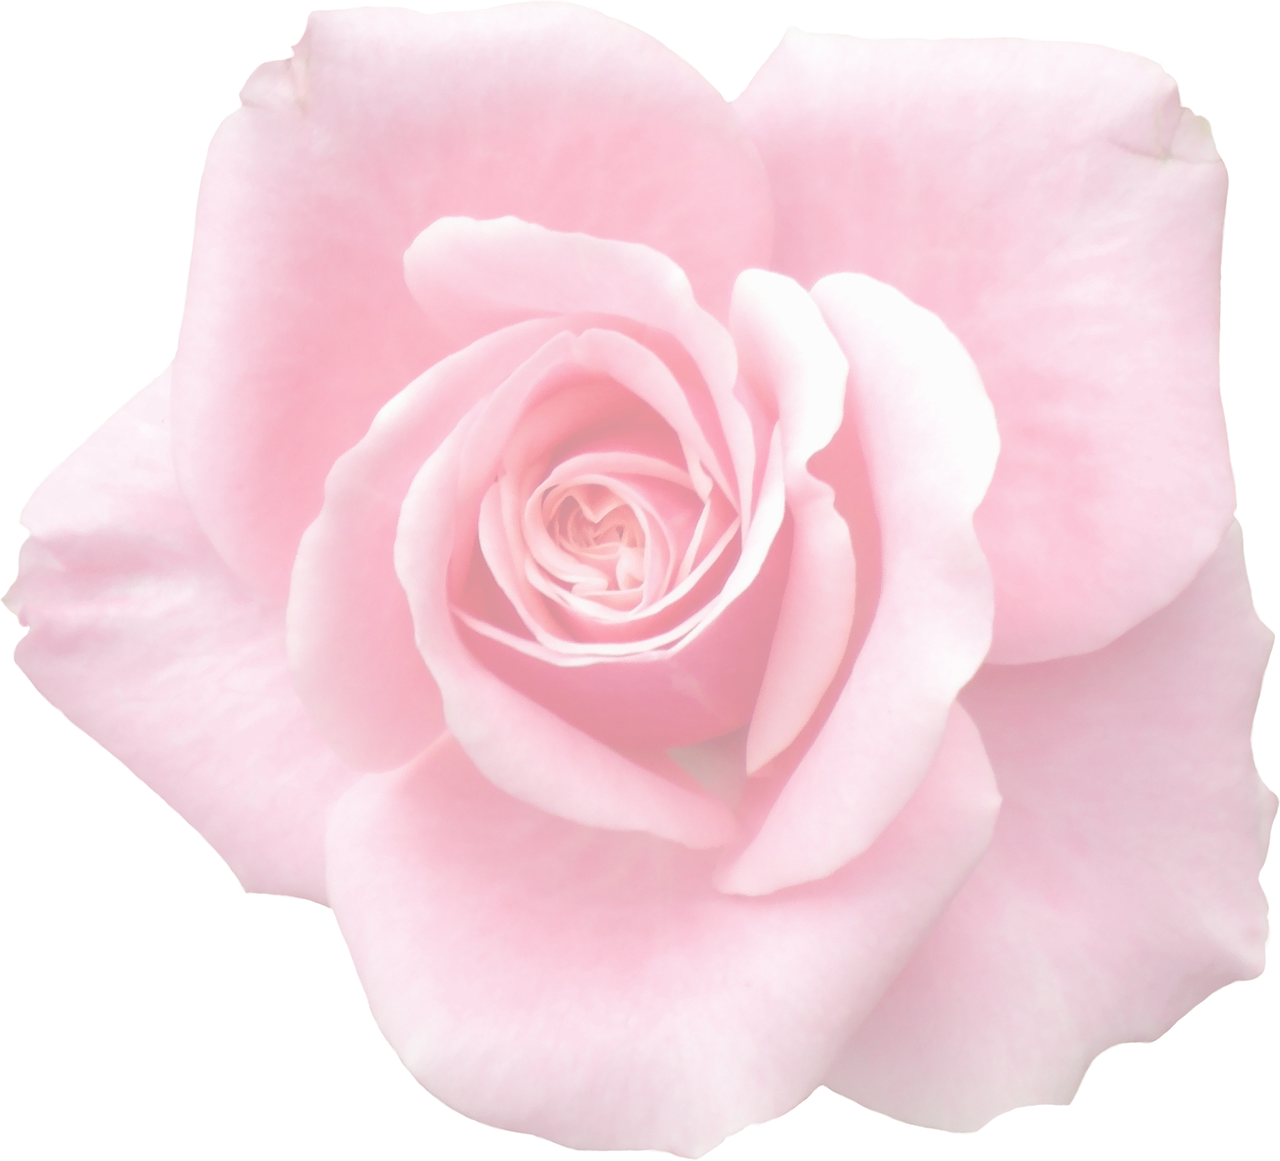 rose graphic isolated free photo